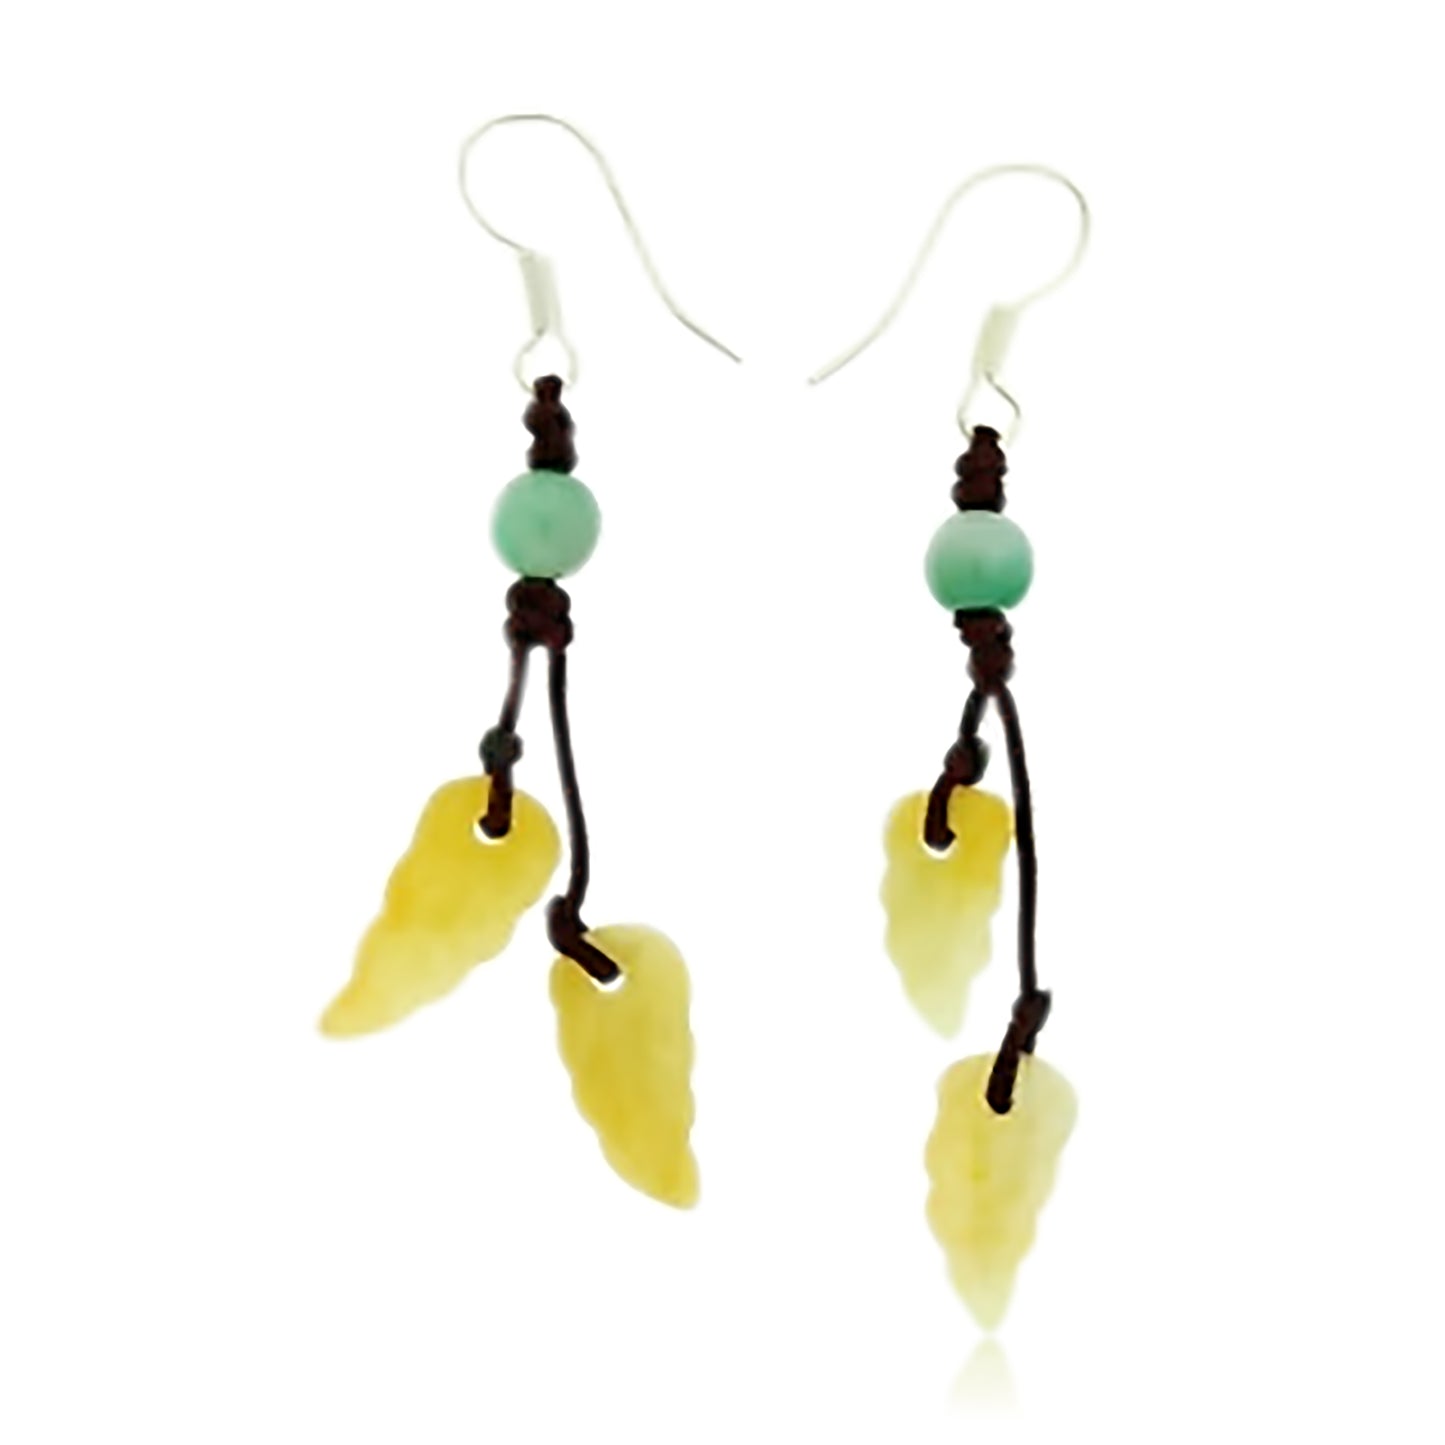 Let Nature Inspire you with these Leafs Handmade Jade Earrings